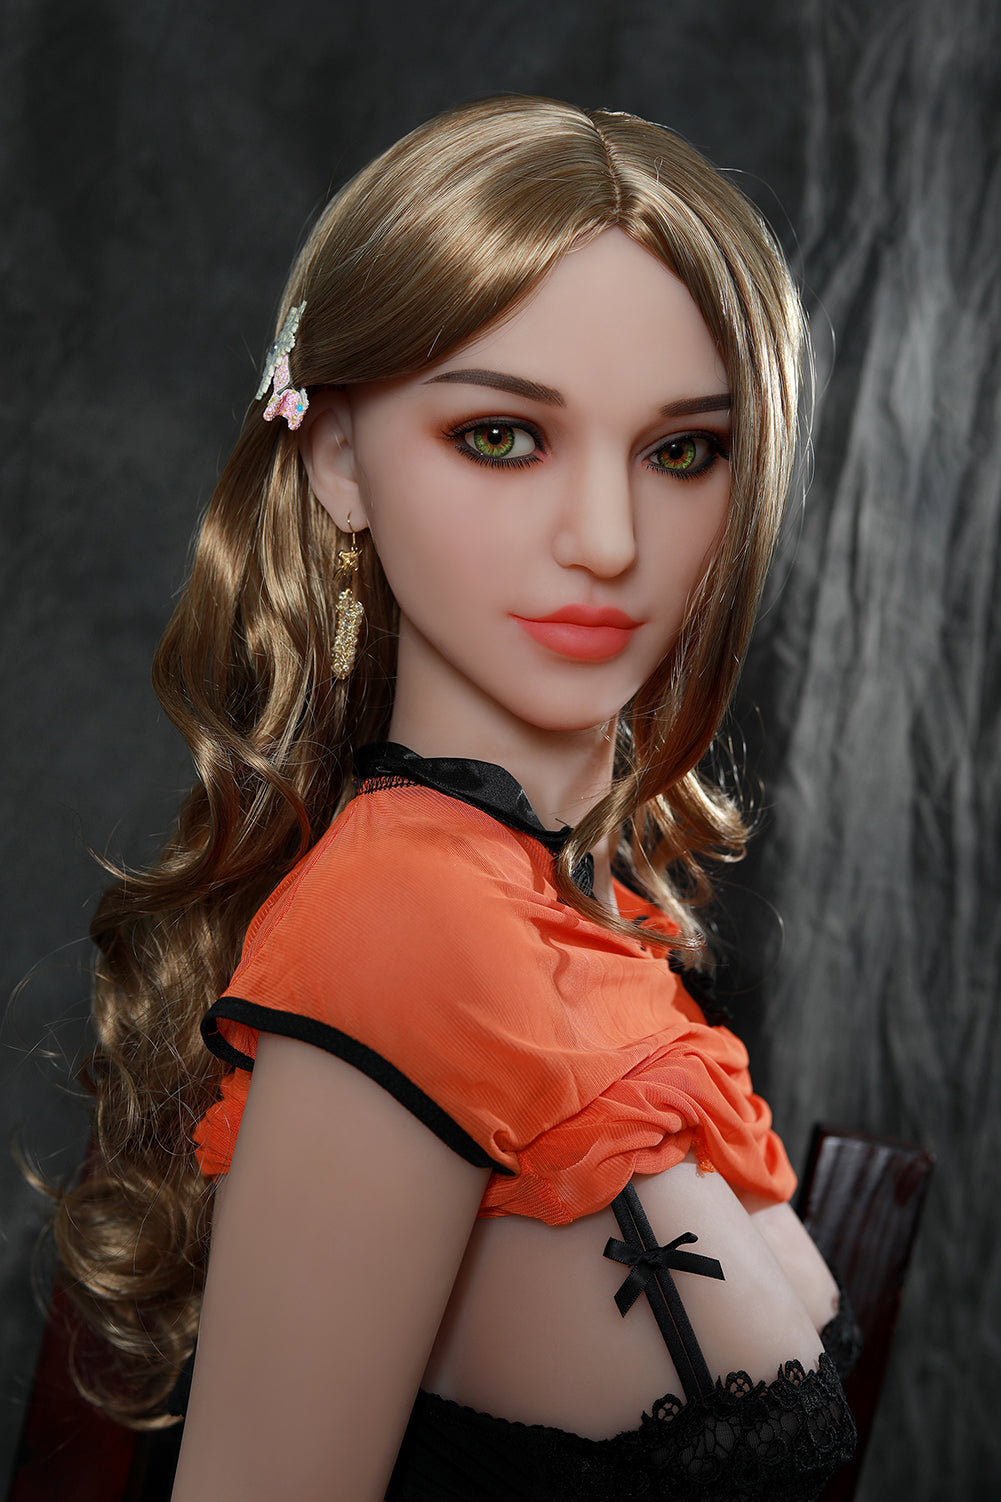  SY Doll 5ft6/165cm Long Blonde Curly Hair Sex Doll -Luella 